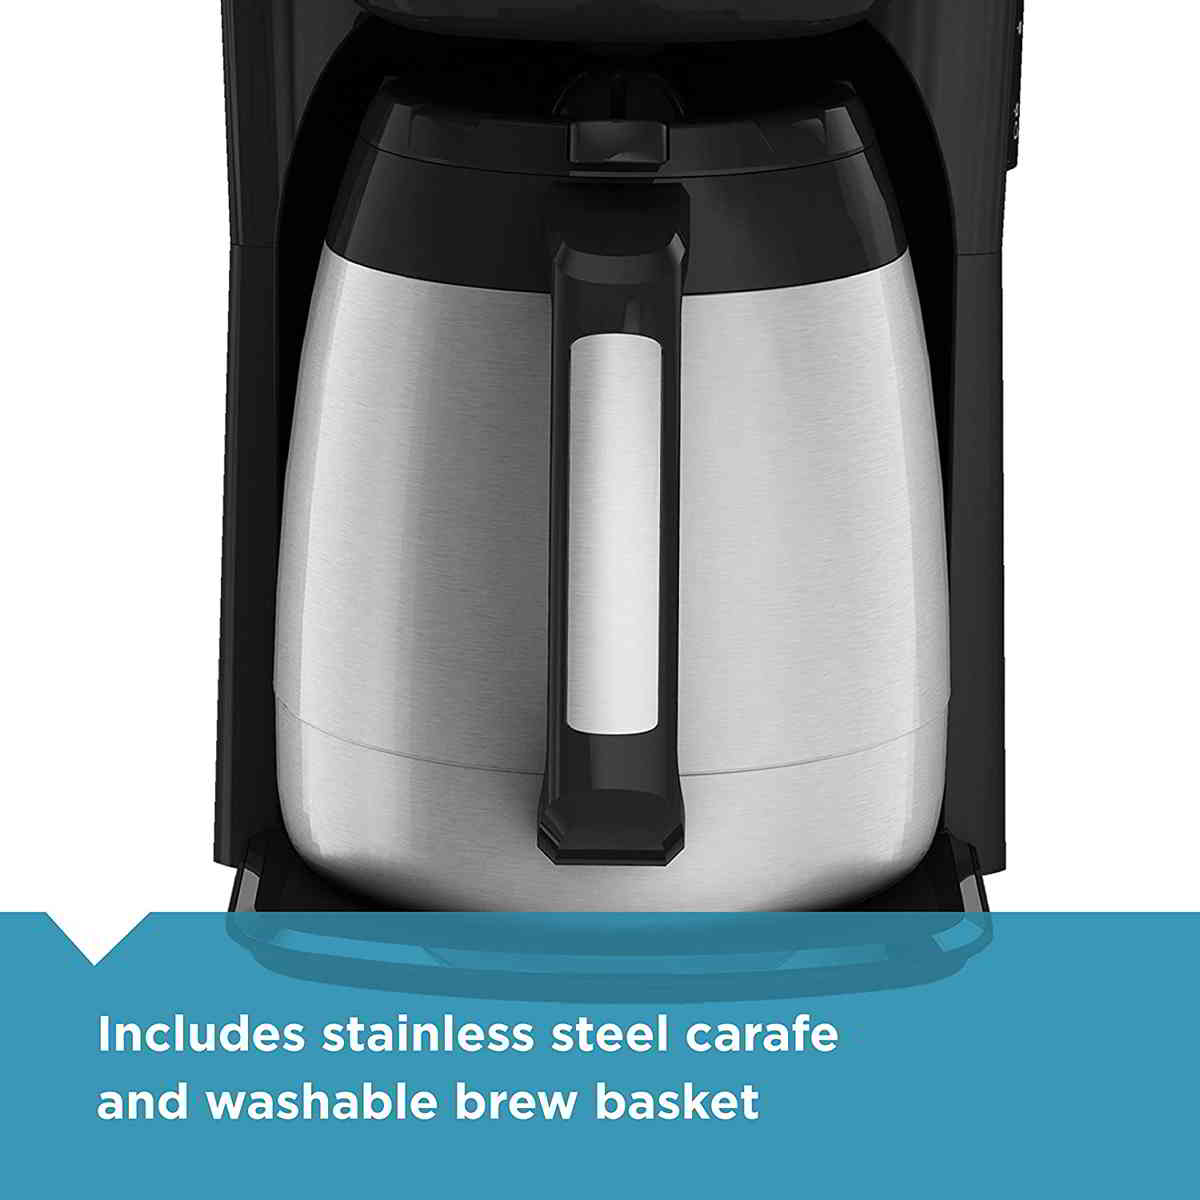 Best coffee maker with stainless steel carafe